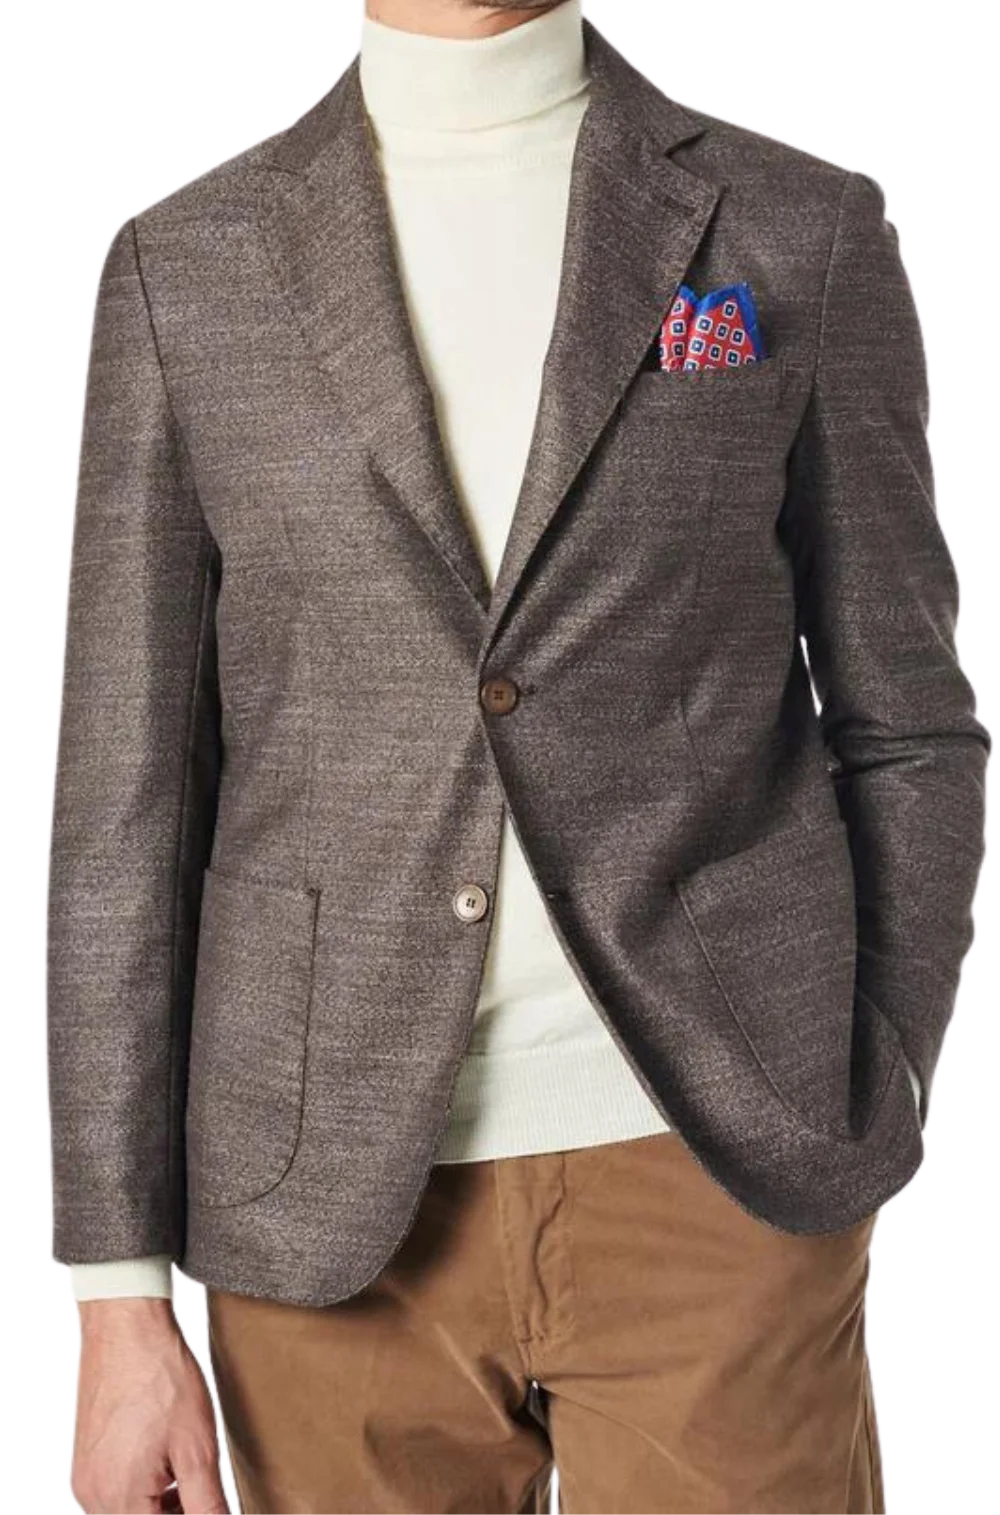 Men's Fusaro Austine Melange Wool Blend Jacket in Brown (21089) - available in-store, 337 Monty Naicker Street, Durban CBD or online at Omar's Tailors & Outfitters online store.   A men's fashion curation for South African men - established in 1911.